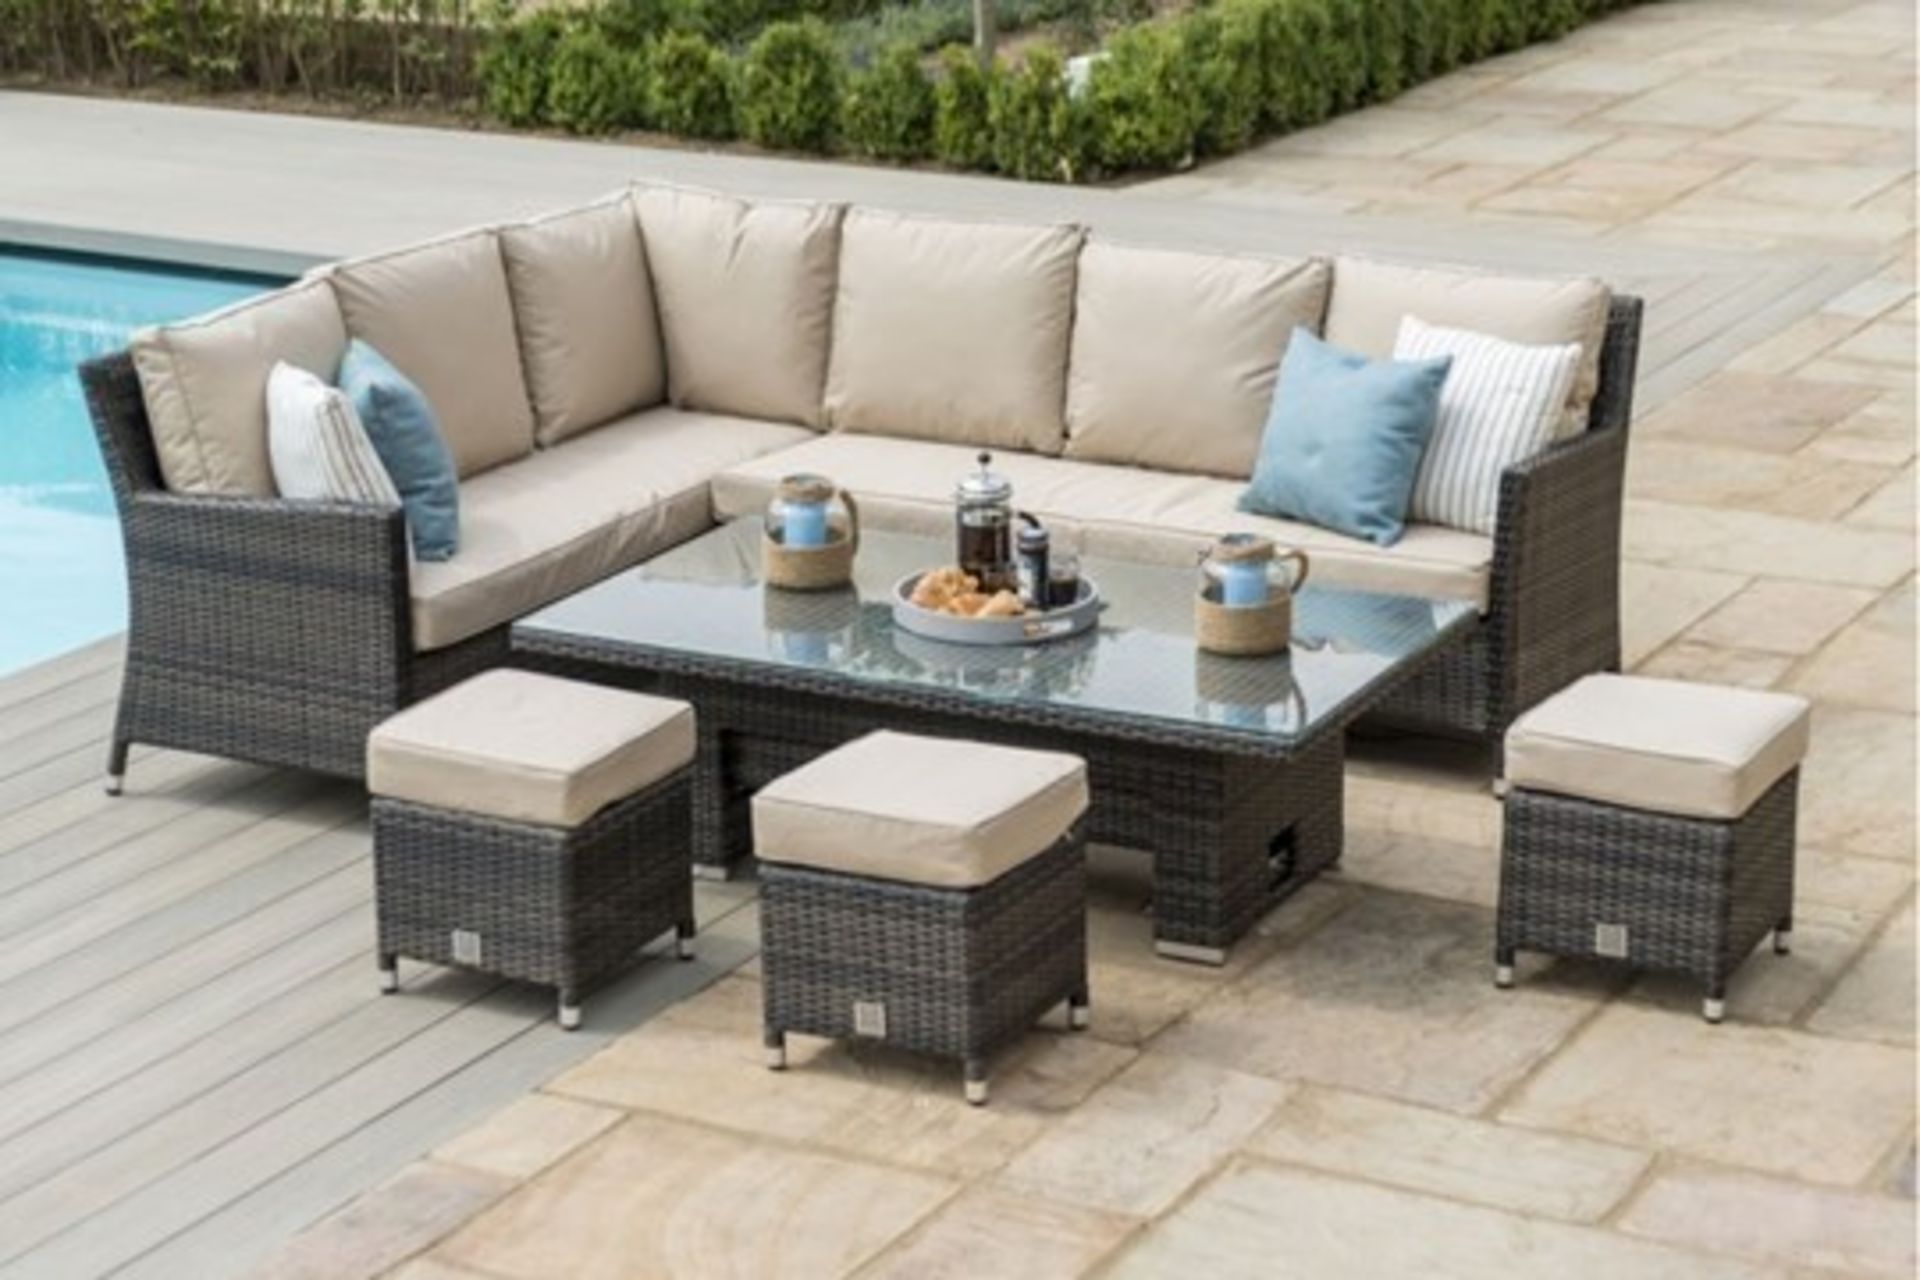 Rattan Venice Corner Outdoor Dining Set With Ice Bucket And Rising Table (Brown) *BRAND NEW* - Image 3 of 3